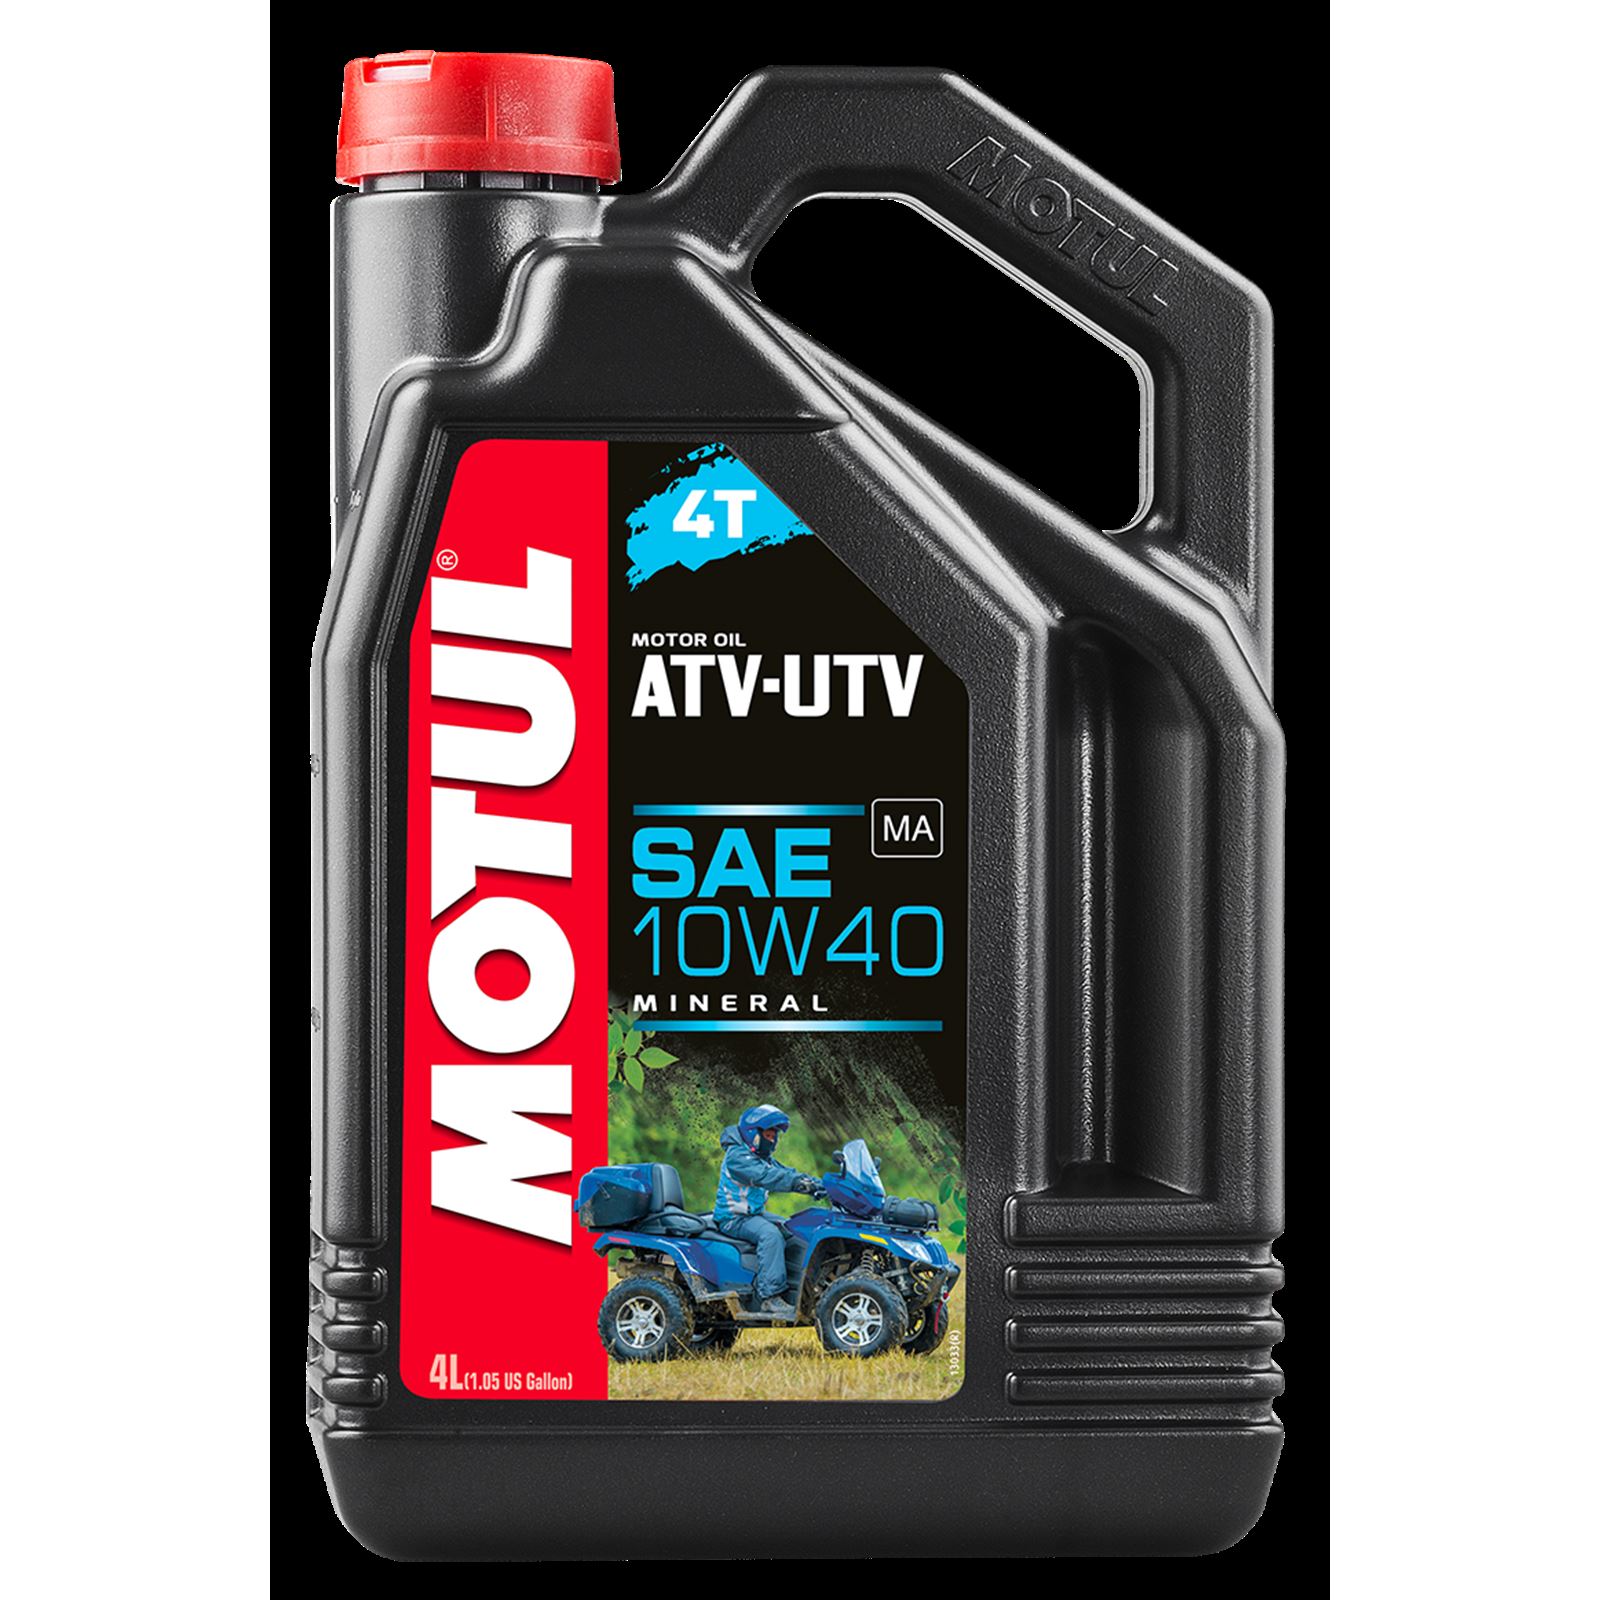 Synthetic Klotz TechniPlate Oil From Snow City